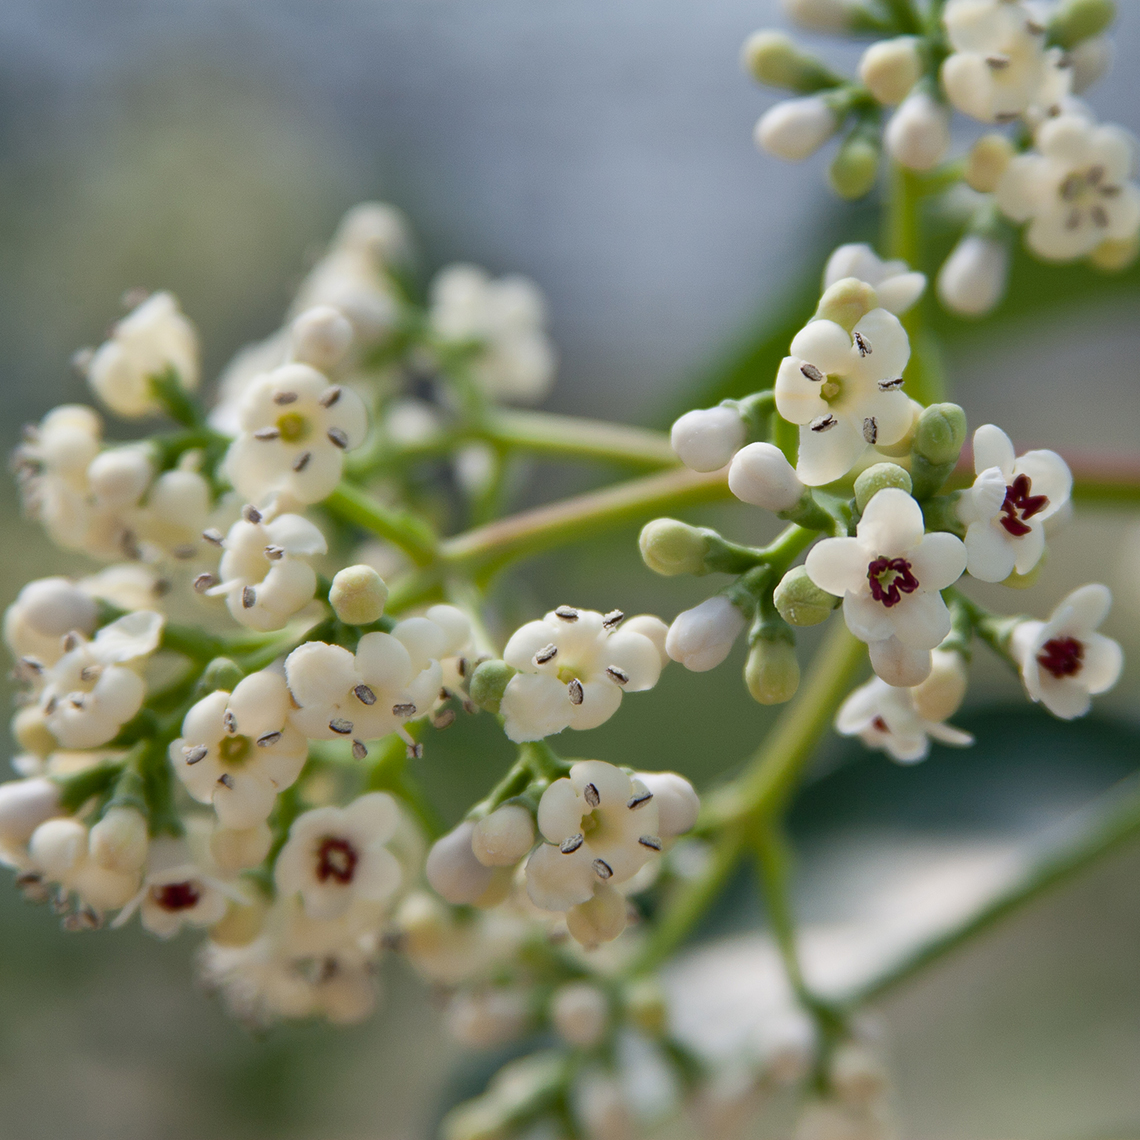 White flowers of Handsome Devil viburnum some of which have red centers and these are the female or seed bearing flowers